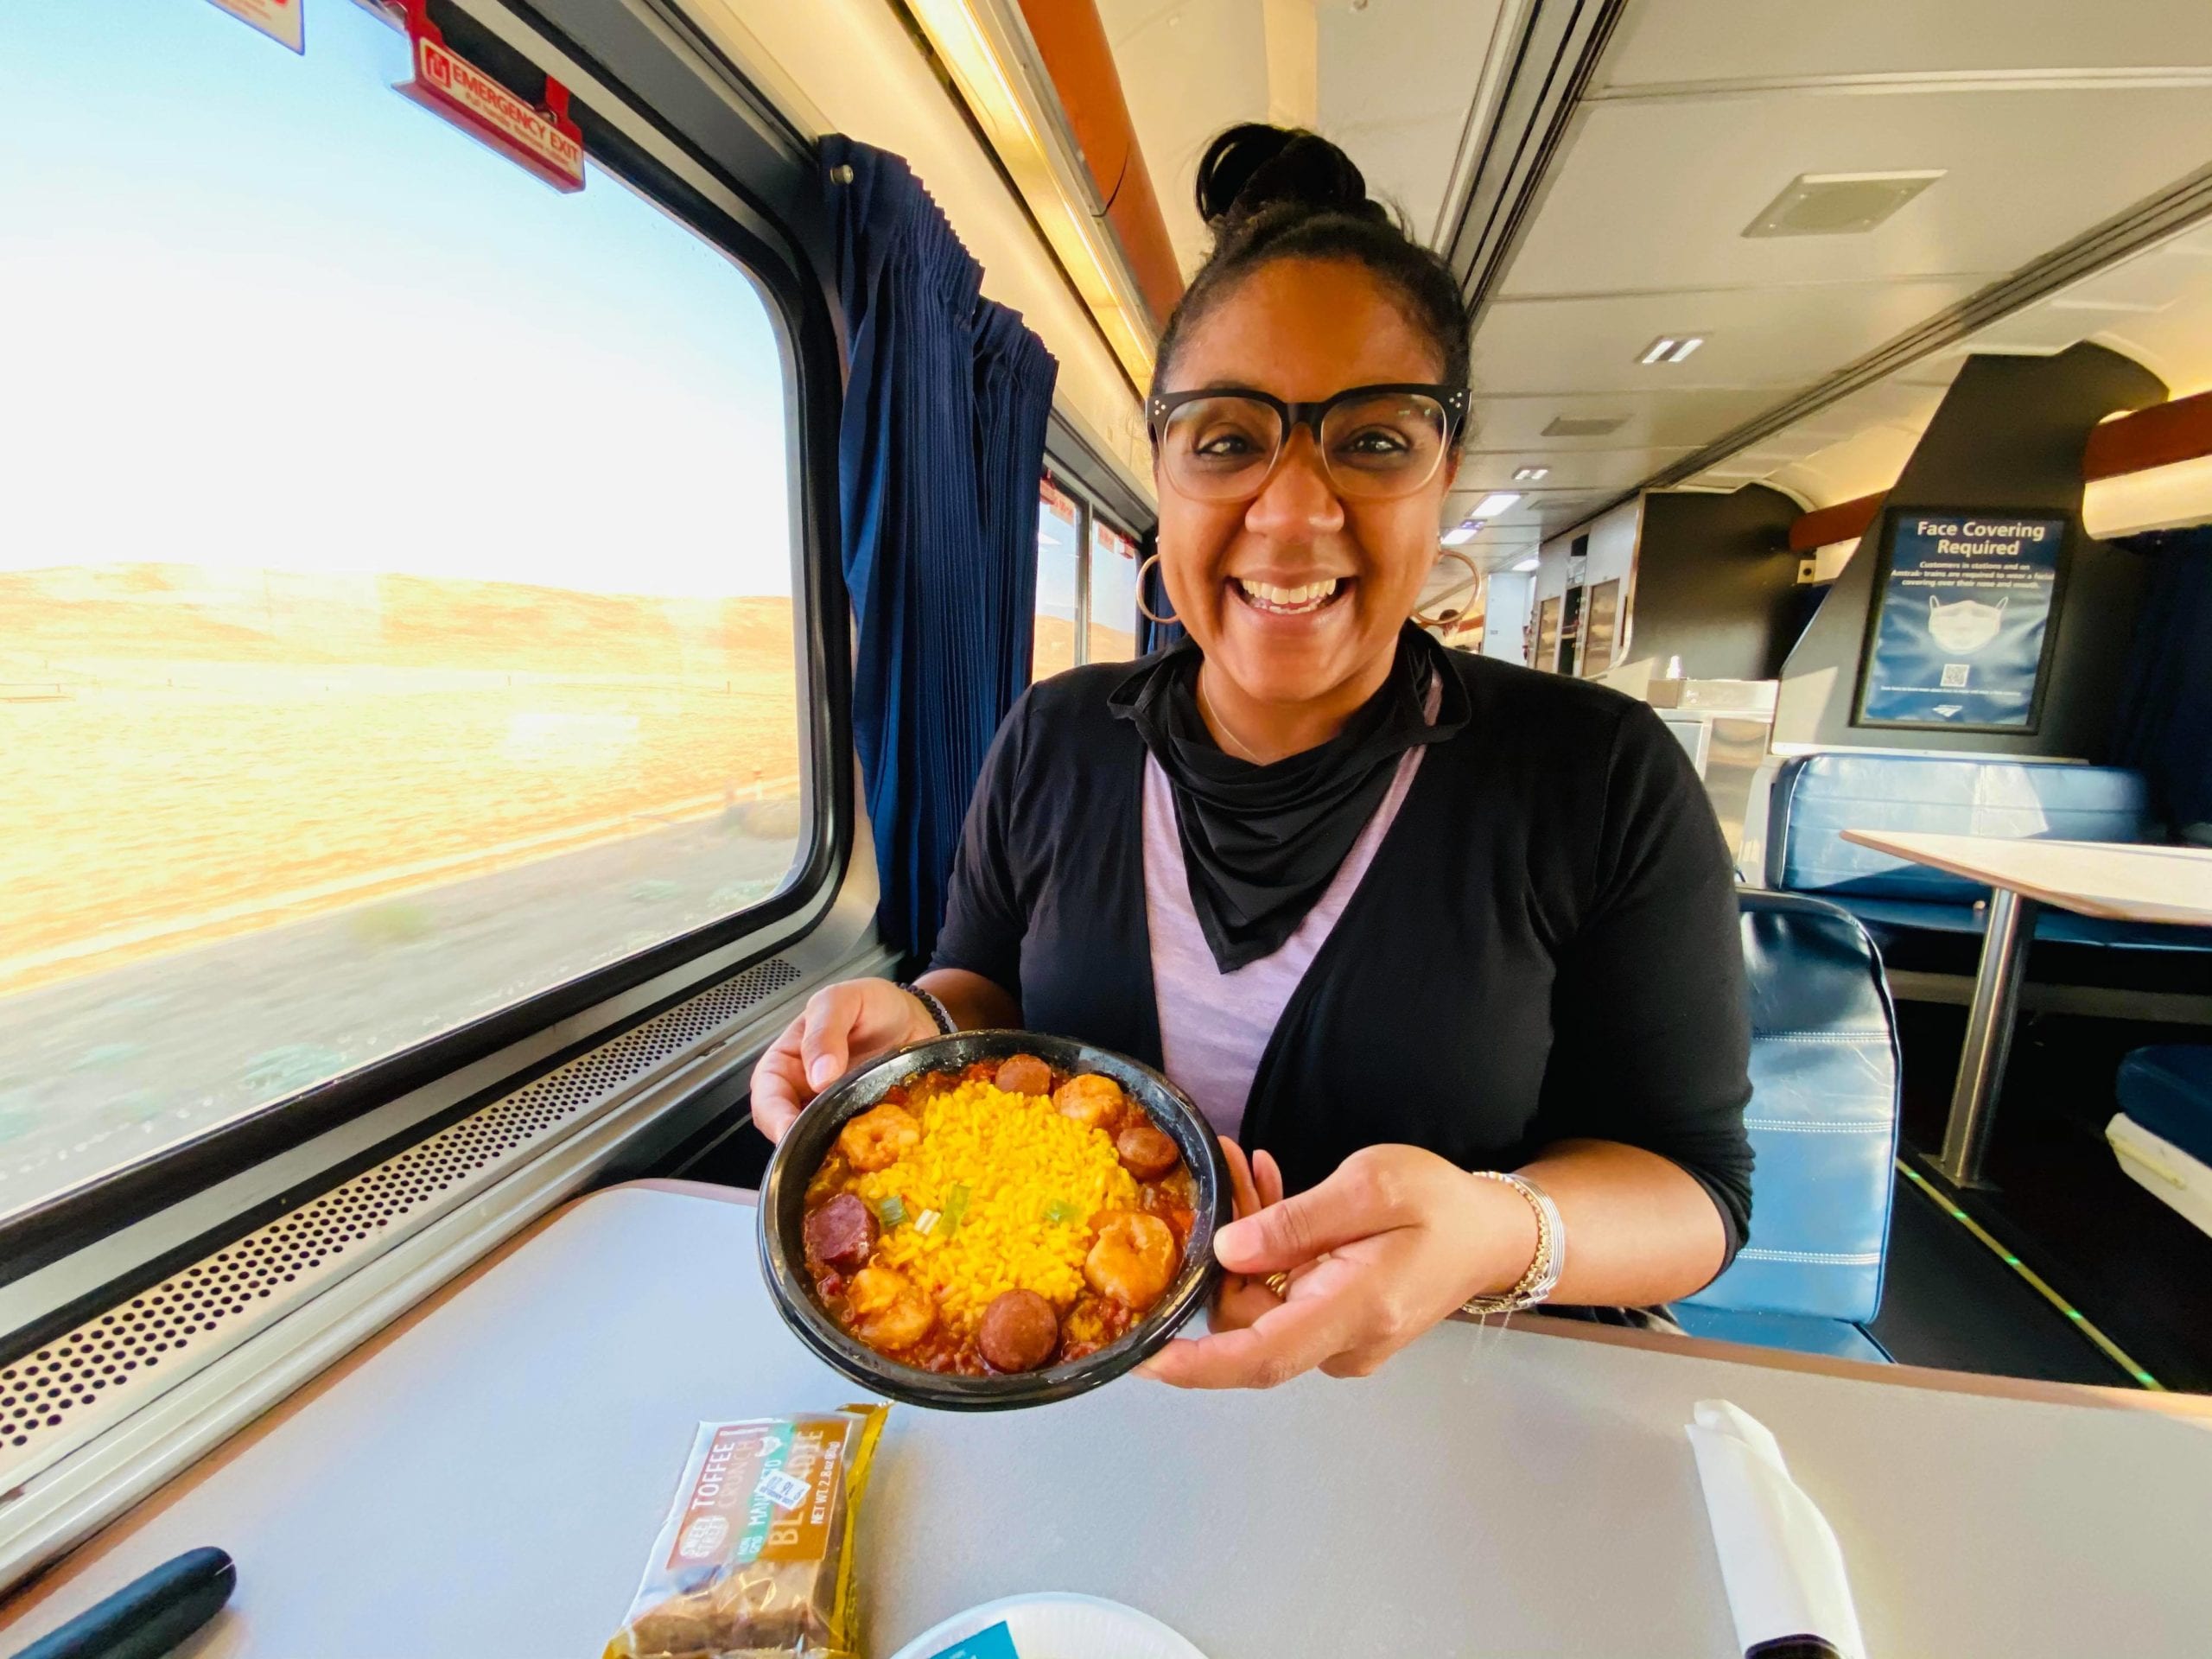 Amtrak Dining Car Menu Review All Of Your Food Options Explained